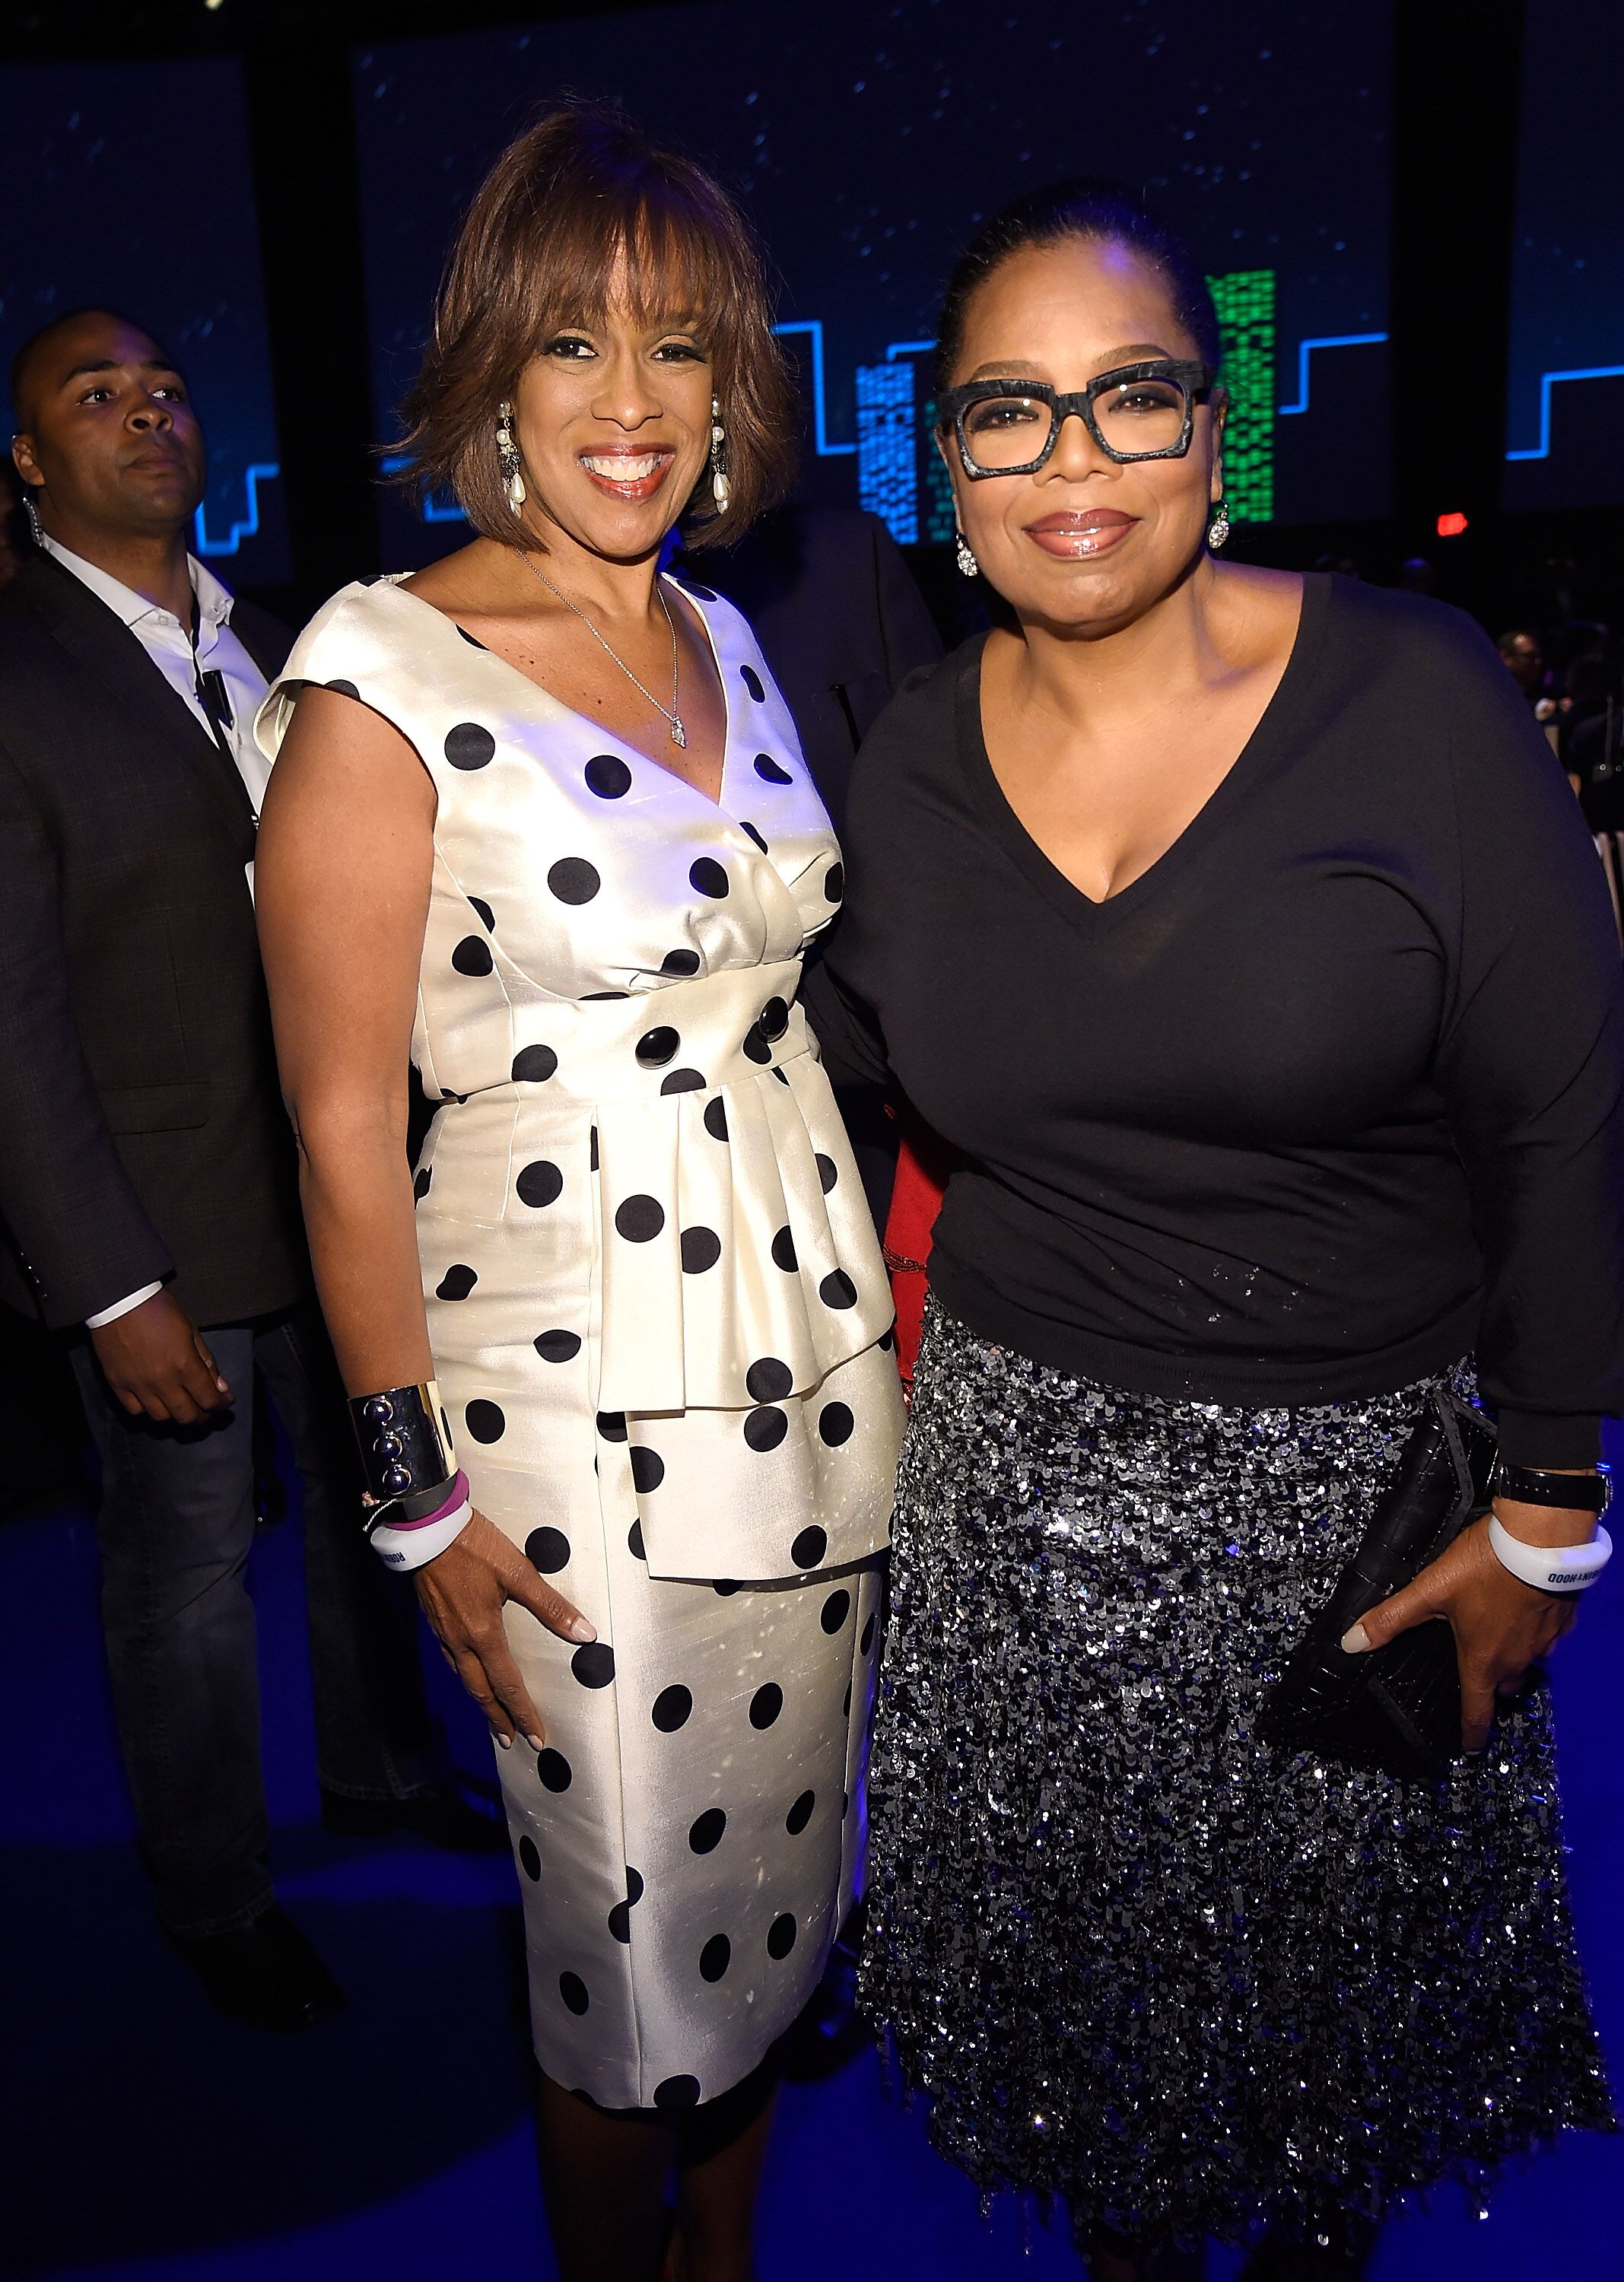 Gayle King and Oprah Winfrey at The Robin Hood Foundation's 2016 Benefit. | Photo: Getty Images